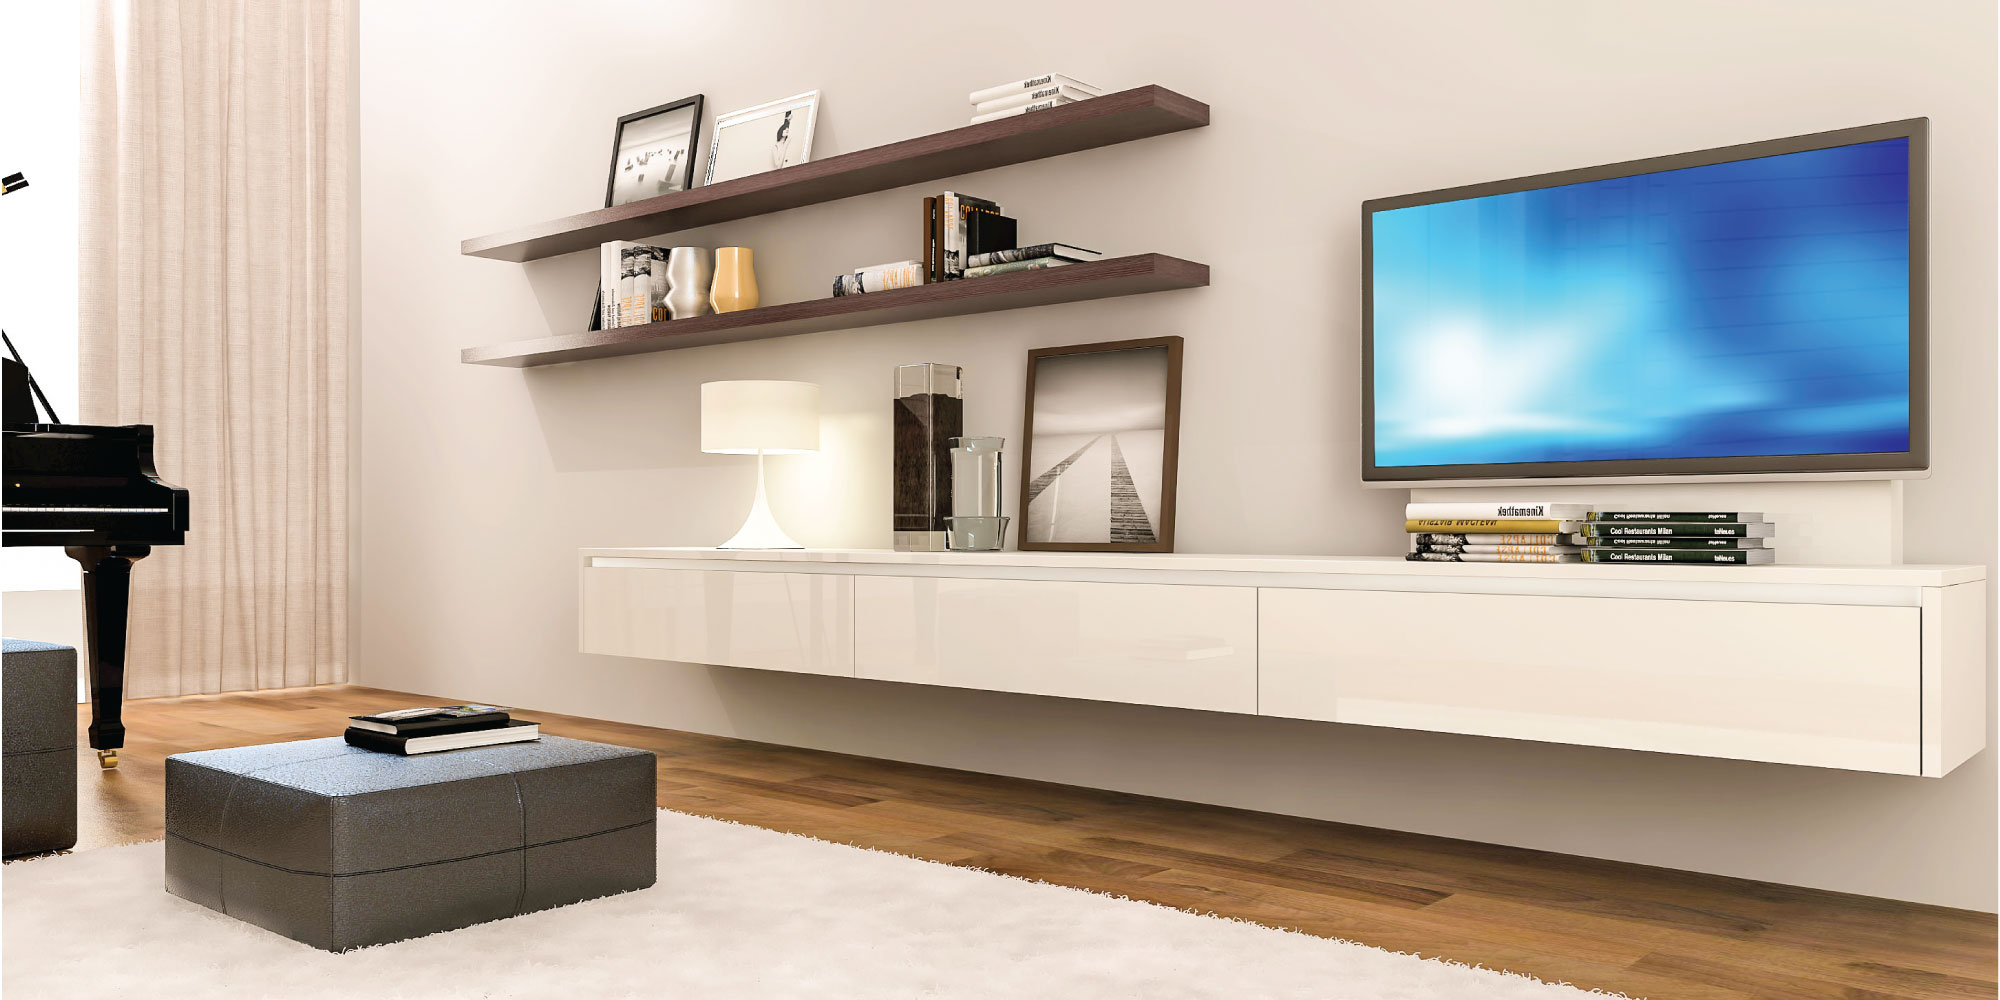 T24-custom-floating-console-with-shelving-web-1000-x-1050px